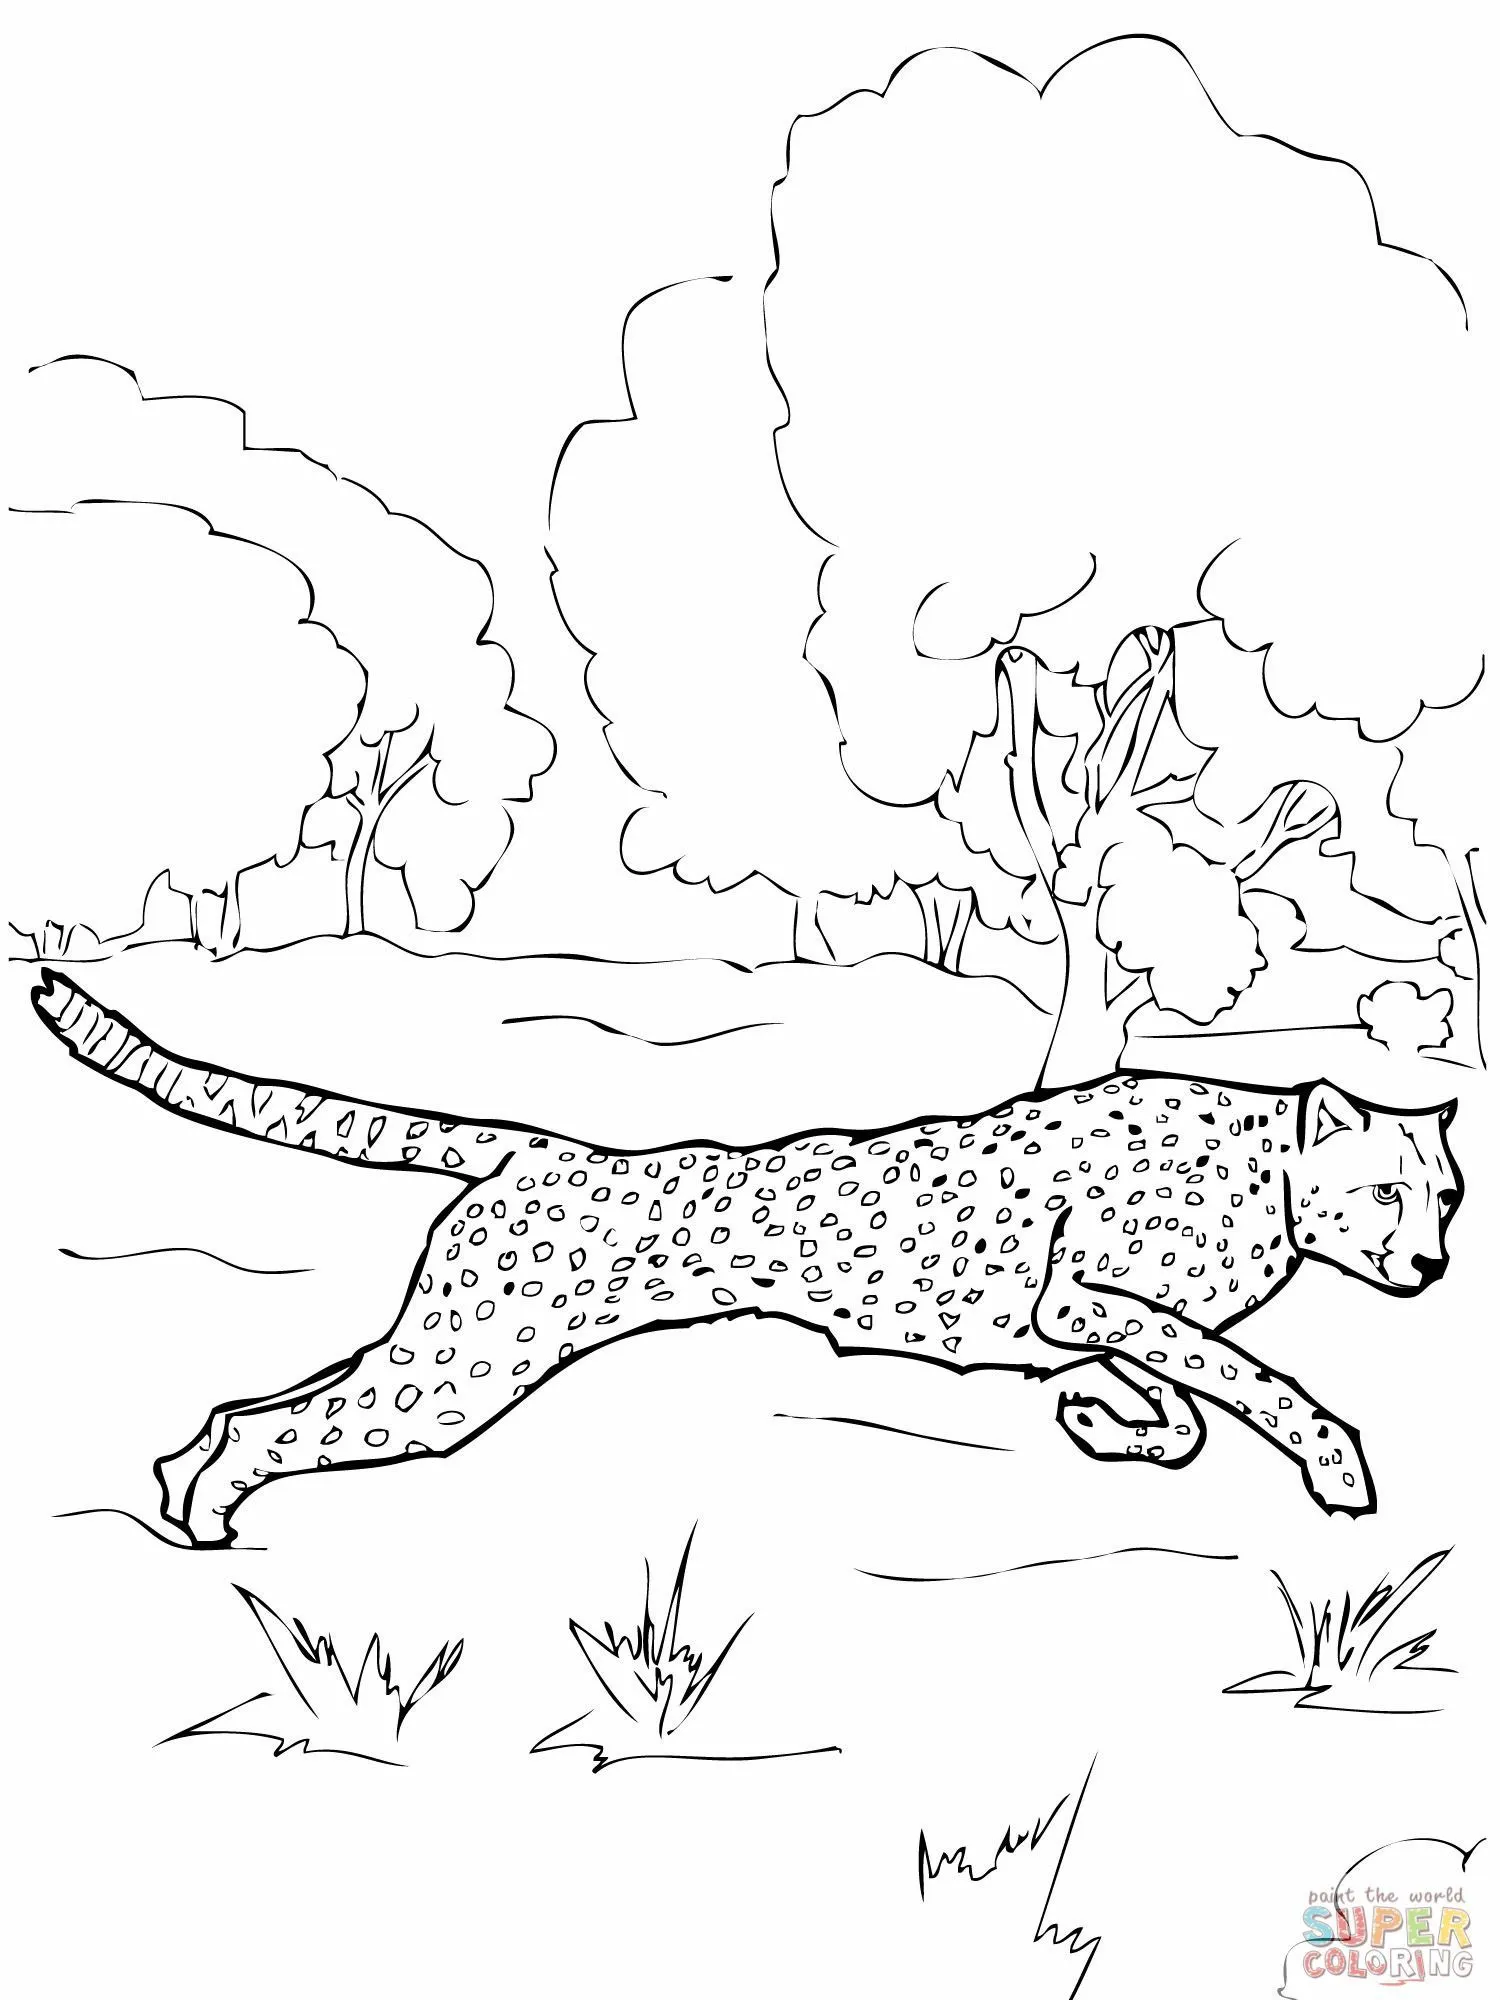 Cheetah coloring page | Animal coloring pages, Cartoon coloring pages,  Coloring book pages